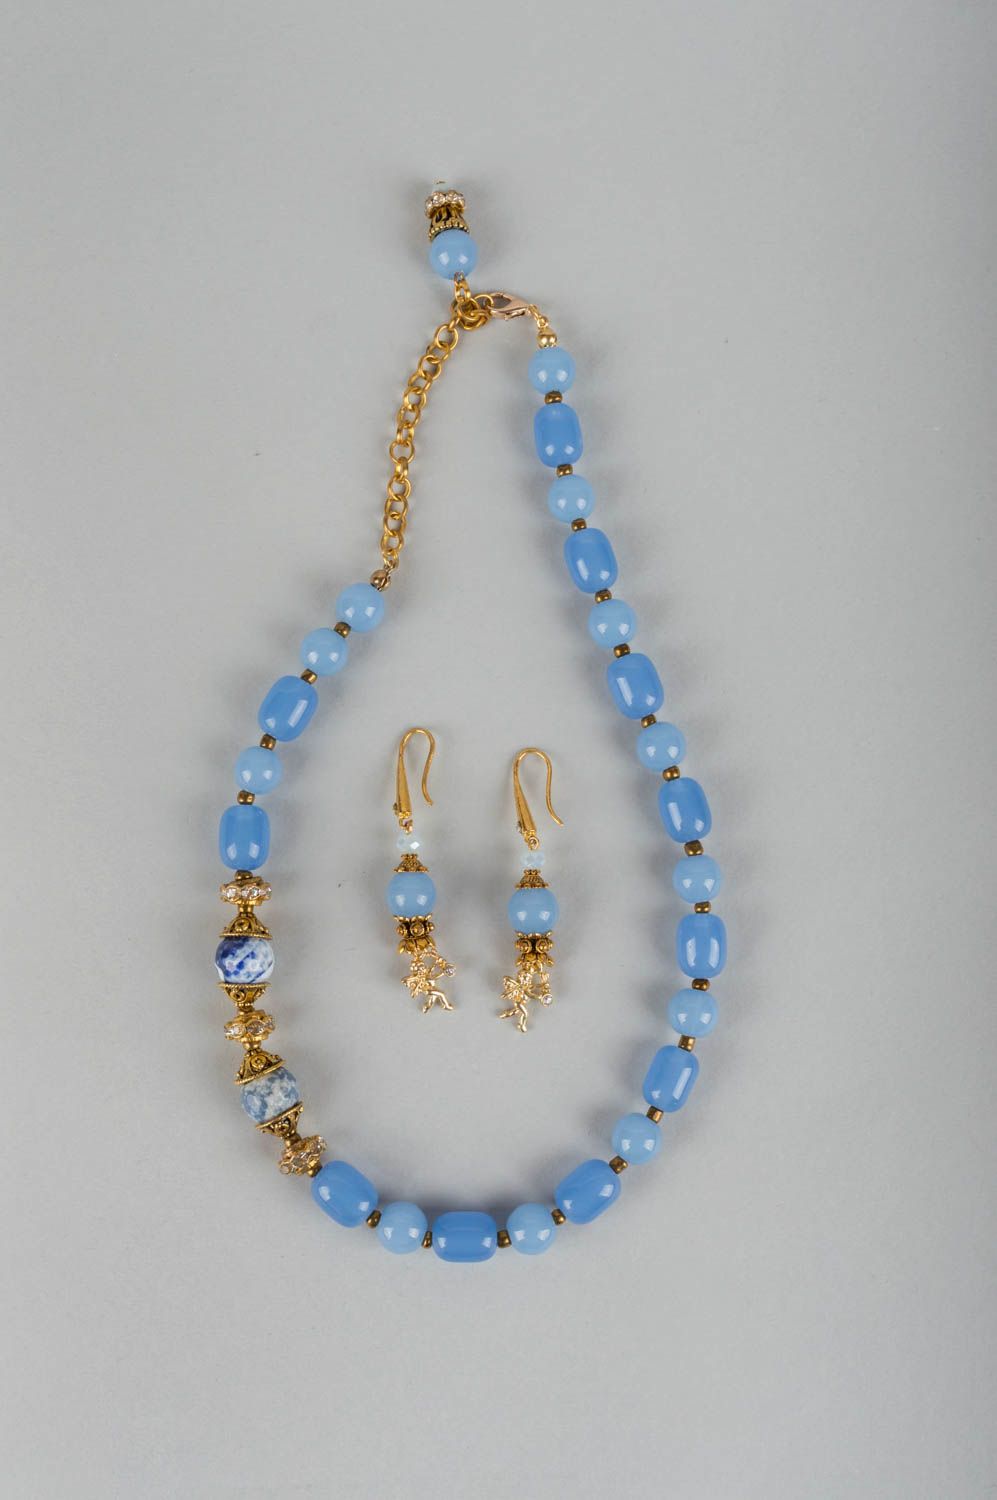 Handmade blue set of jewelry with natural stones 2 pieces earrings and necklace photo 2